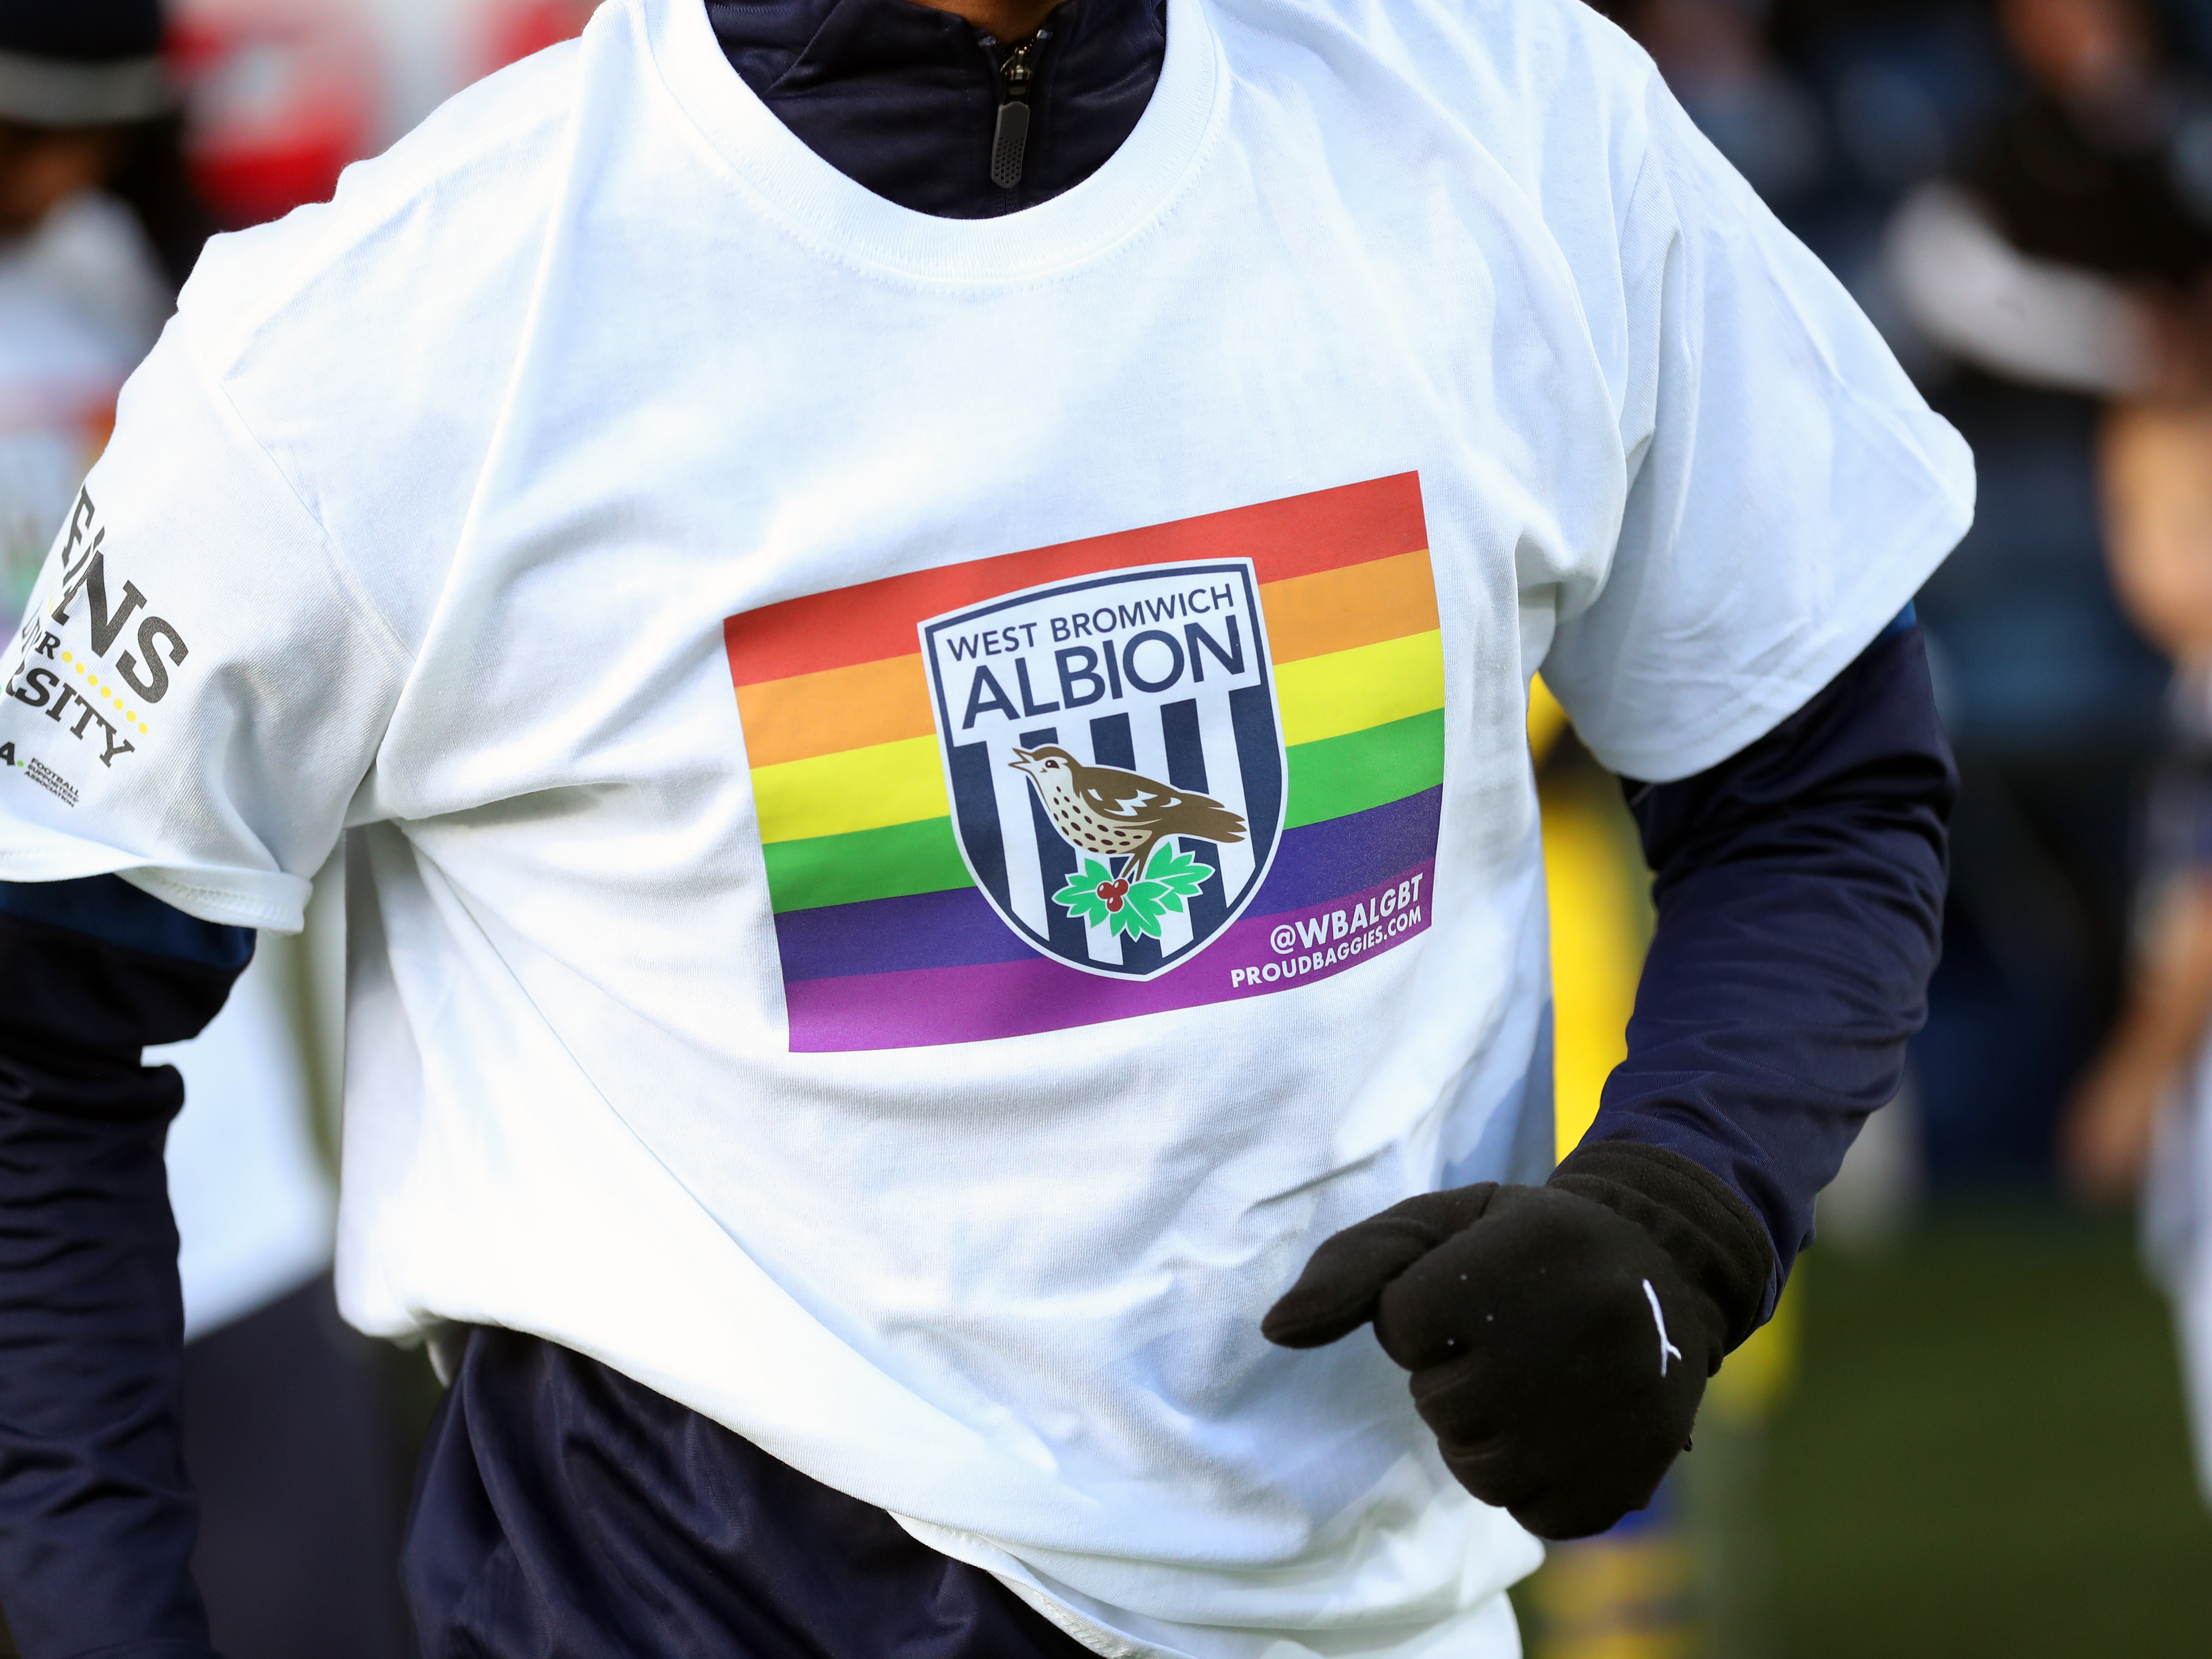 The Albion squad will warm-up in shirts profiling the Profile Baggies logo and the captain will wear a rainbow armband